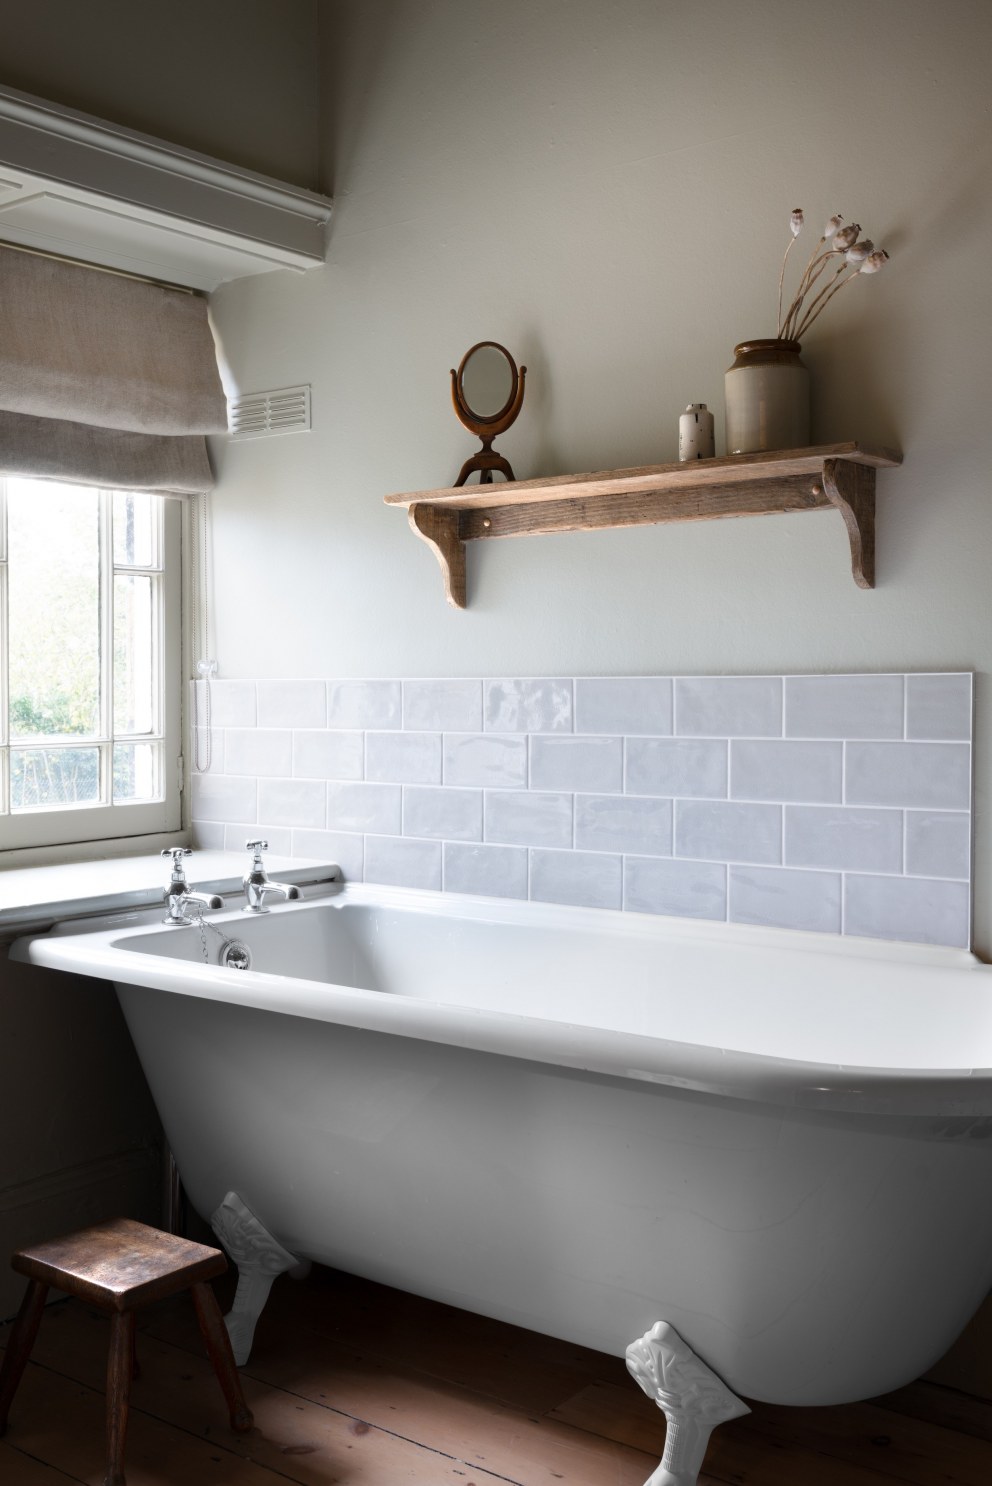 Boutique Holiday Let in a Grade II listed Hall | Ensuite Bathroom in grade 2 listed hall | Interior Designers